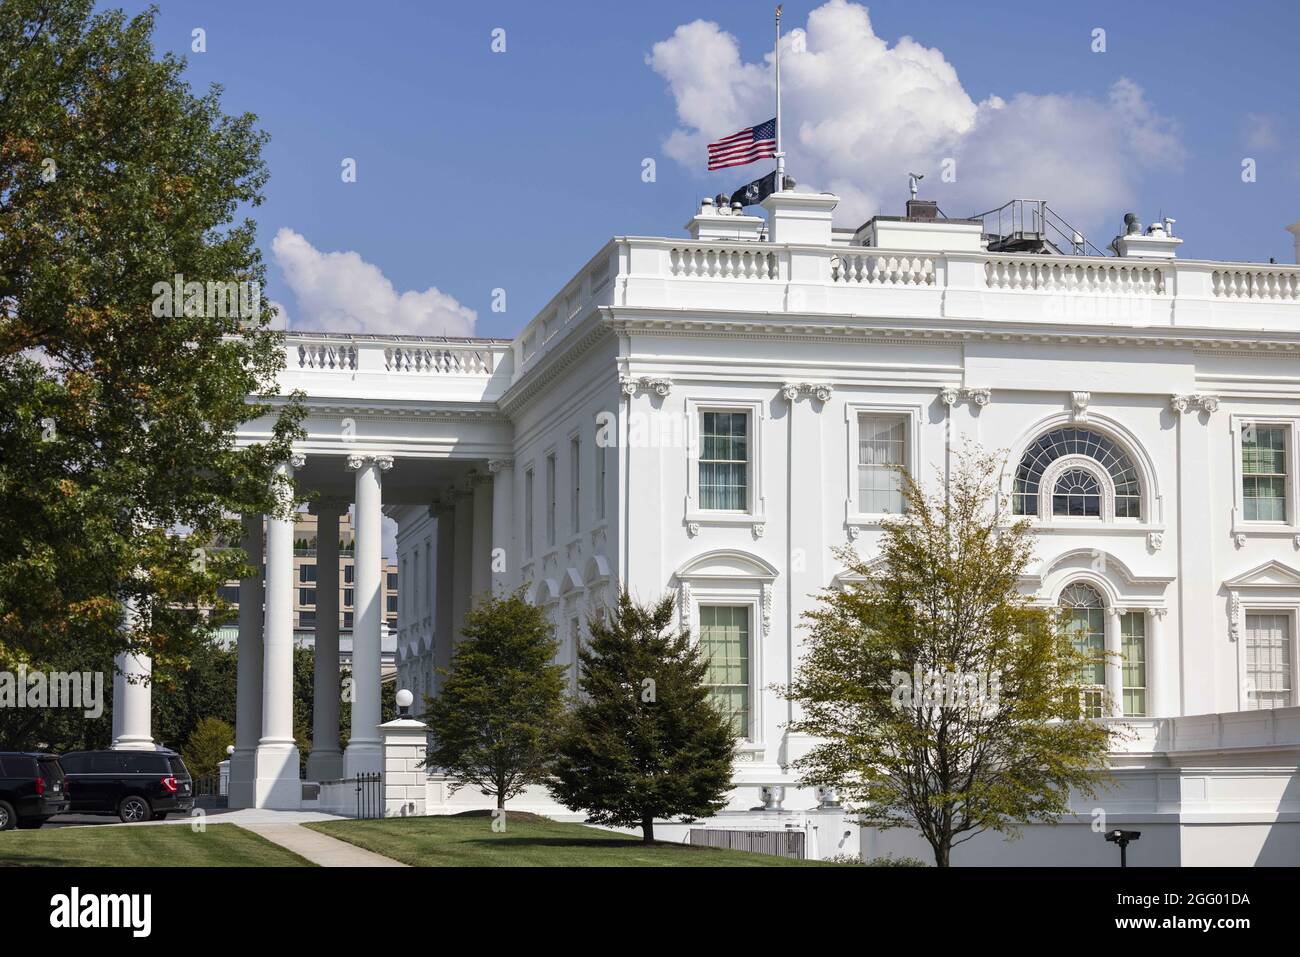 The US flag flies at half-staff above the White House in Washington, DC, USA, 27 August 2021. A suicide bomber from ISIS-K killed more than 100 people, including 13 US troops, outside Hamid Karzai International Airport in Kabul, Afghanistan on 26 August. Stock Photo